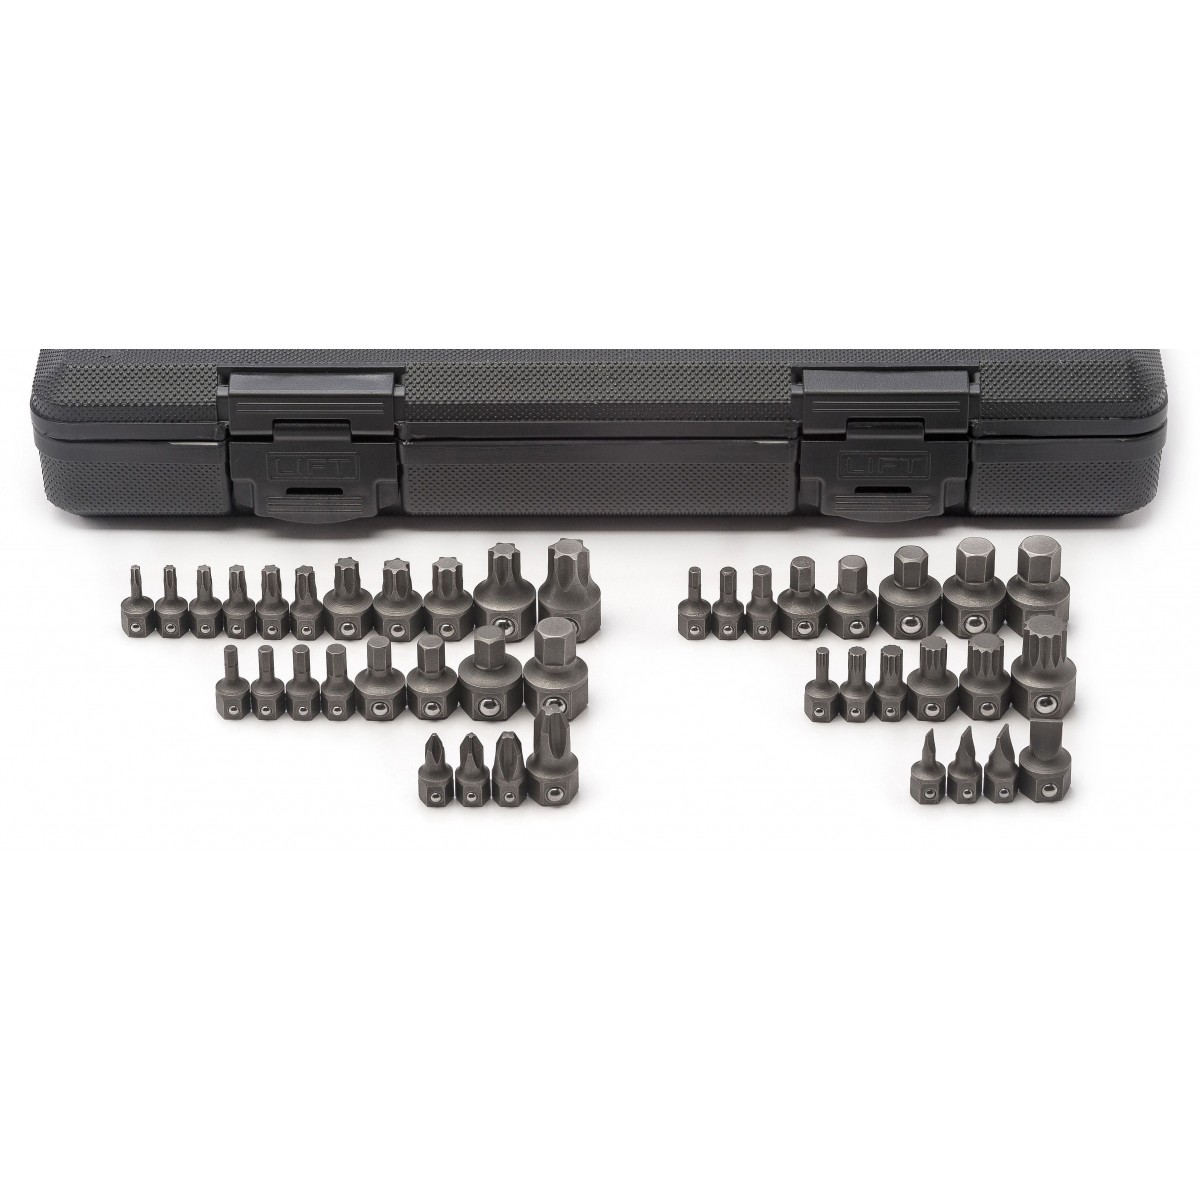 Gwr81602 Sae & Metric Ratcheting Wrench Set - 41 Piece